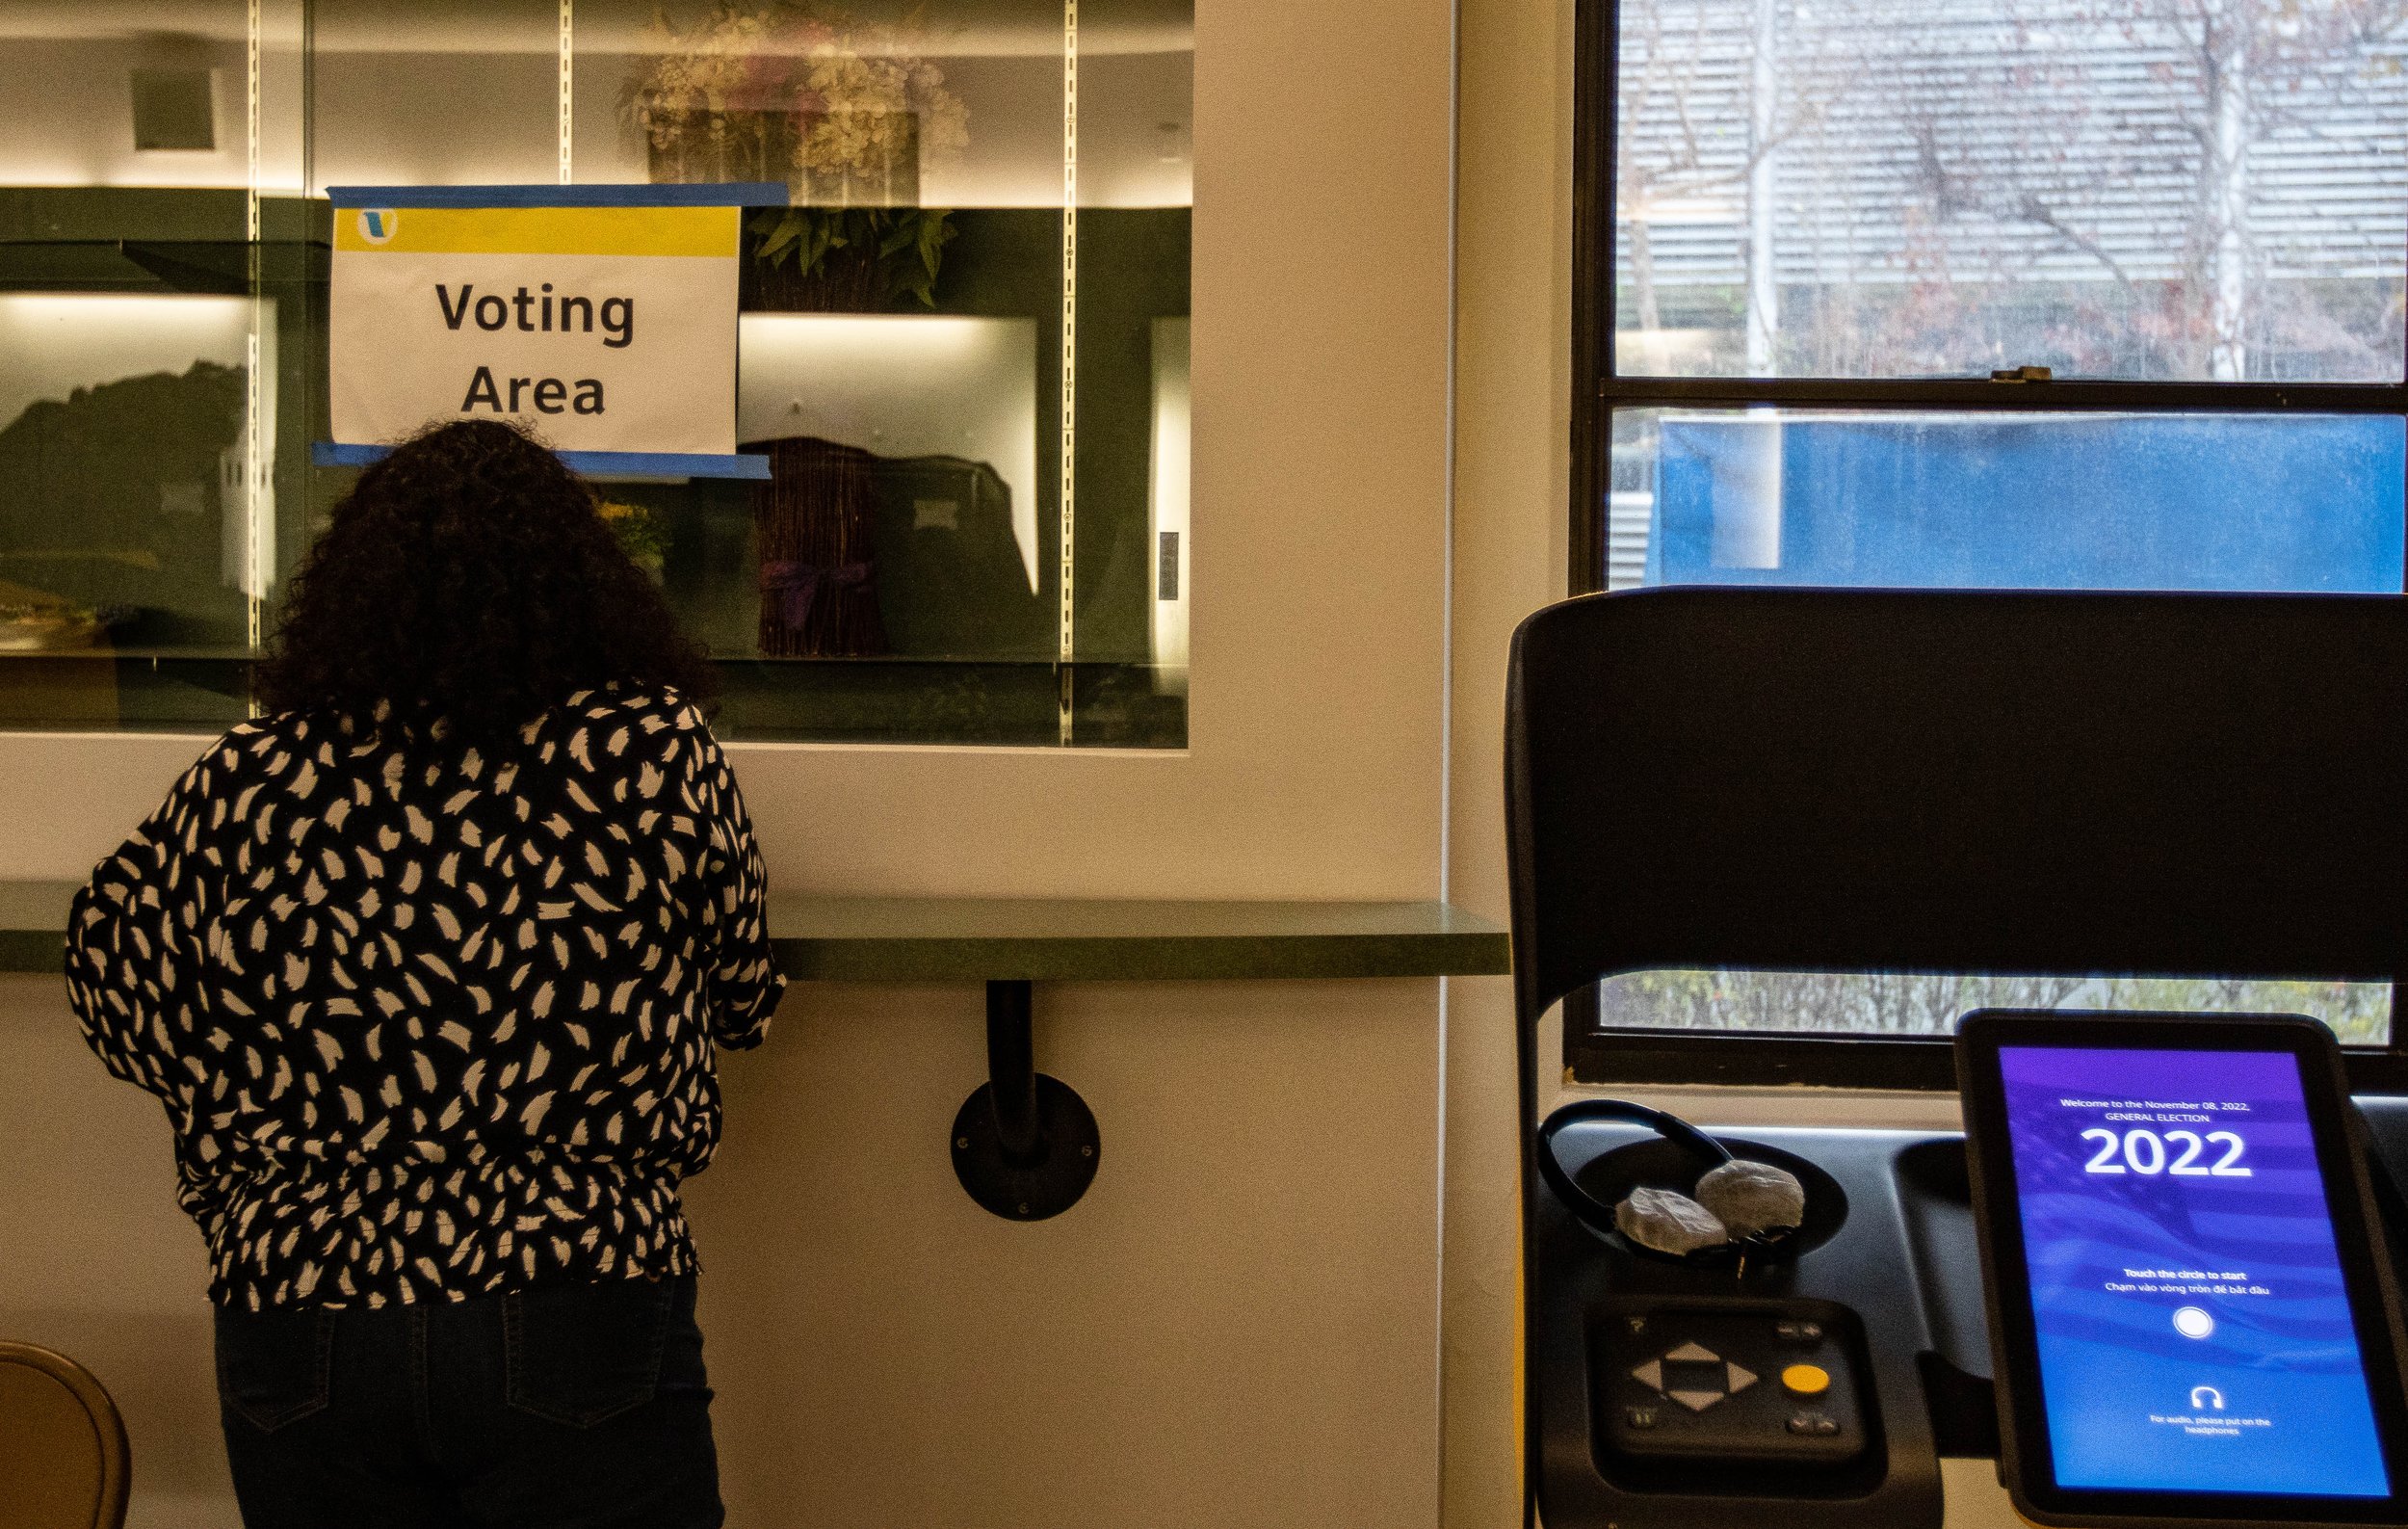  One of the polling members sanitizing a voting area after it's been used. A day before Election Day on Nov. 8, 2022 at the Santa Monica College voting center on the main campus' faculty lounge by the cafeteria. Voters were both students and resident